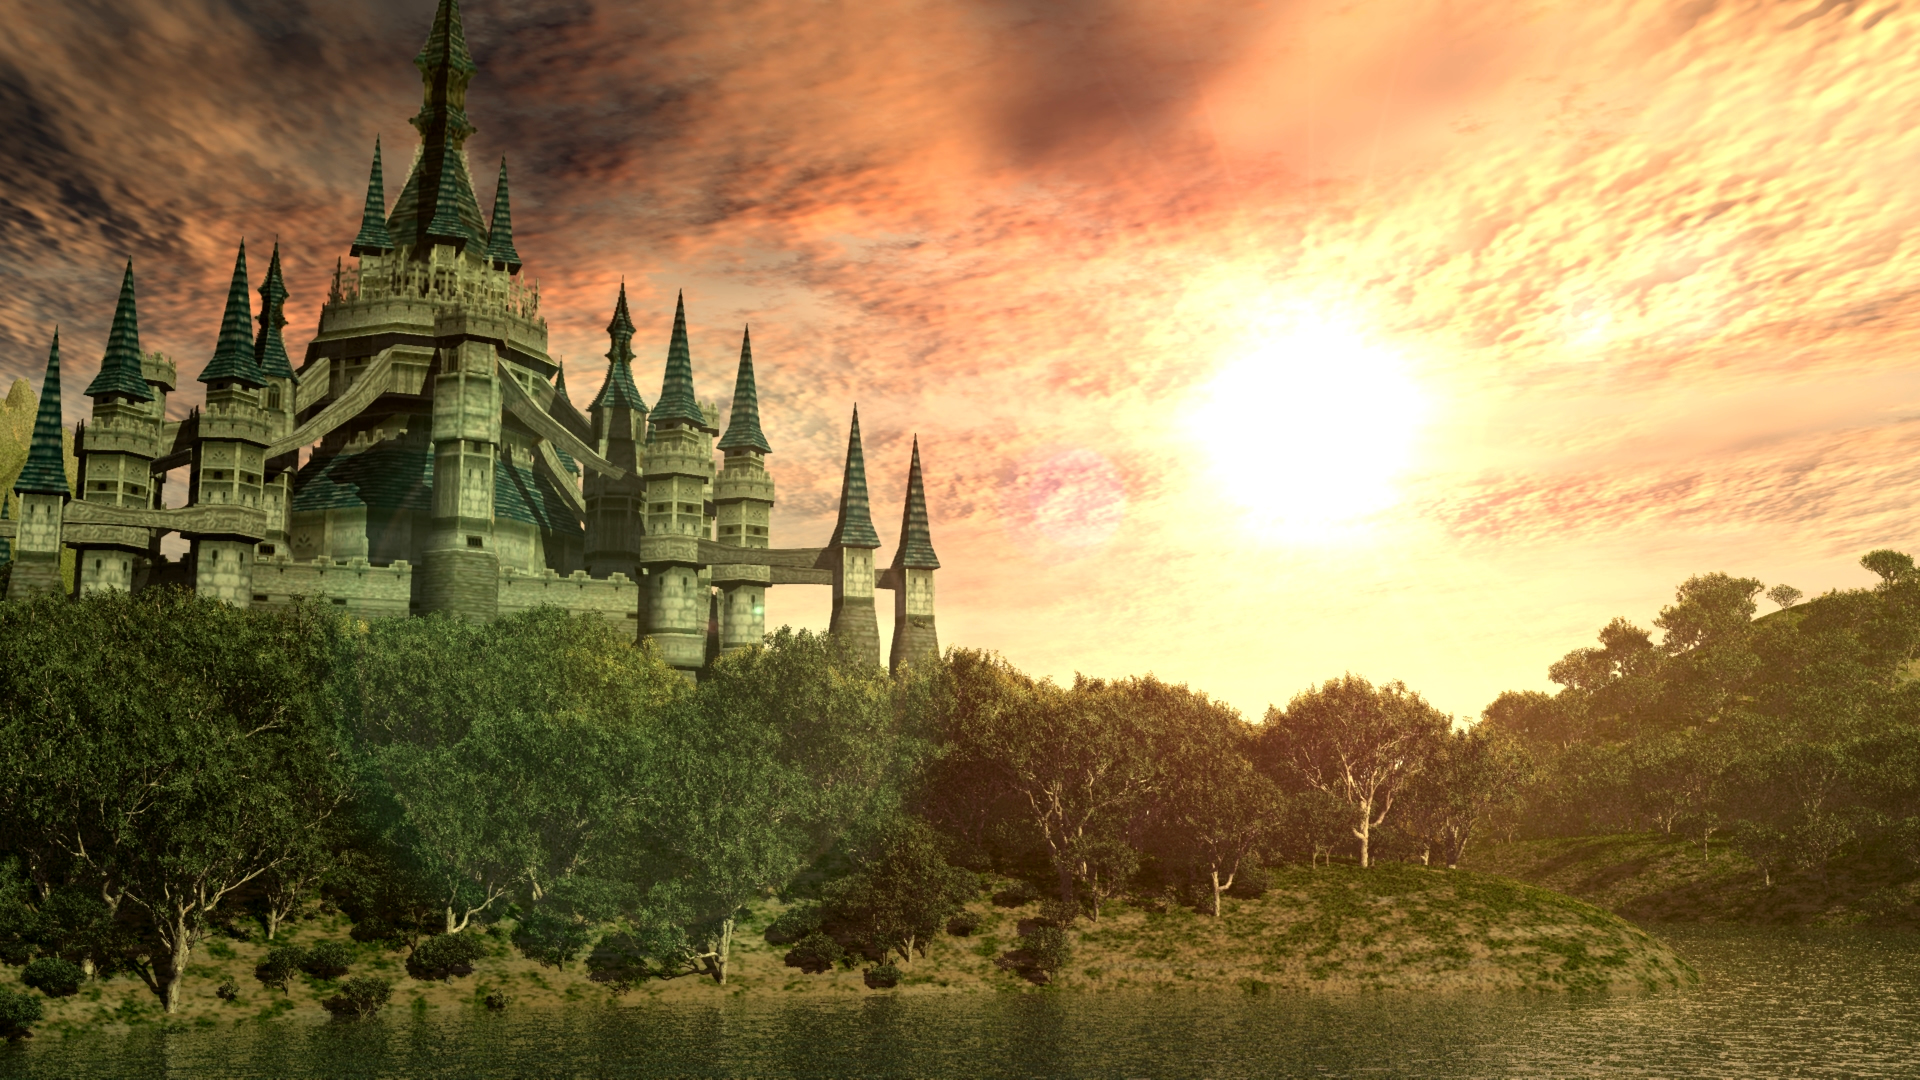 Background Darklordiiid Shopped Hyrule Revisited Whichever